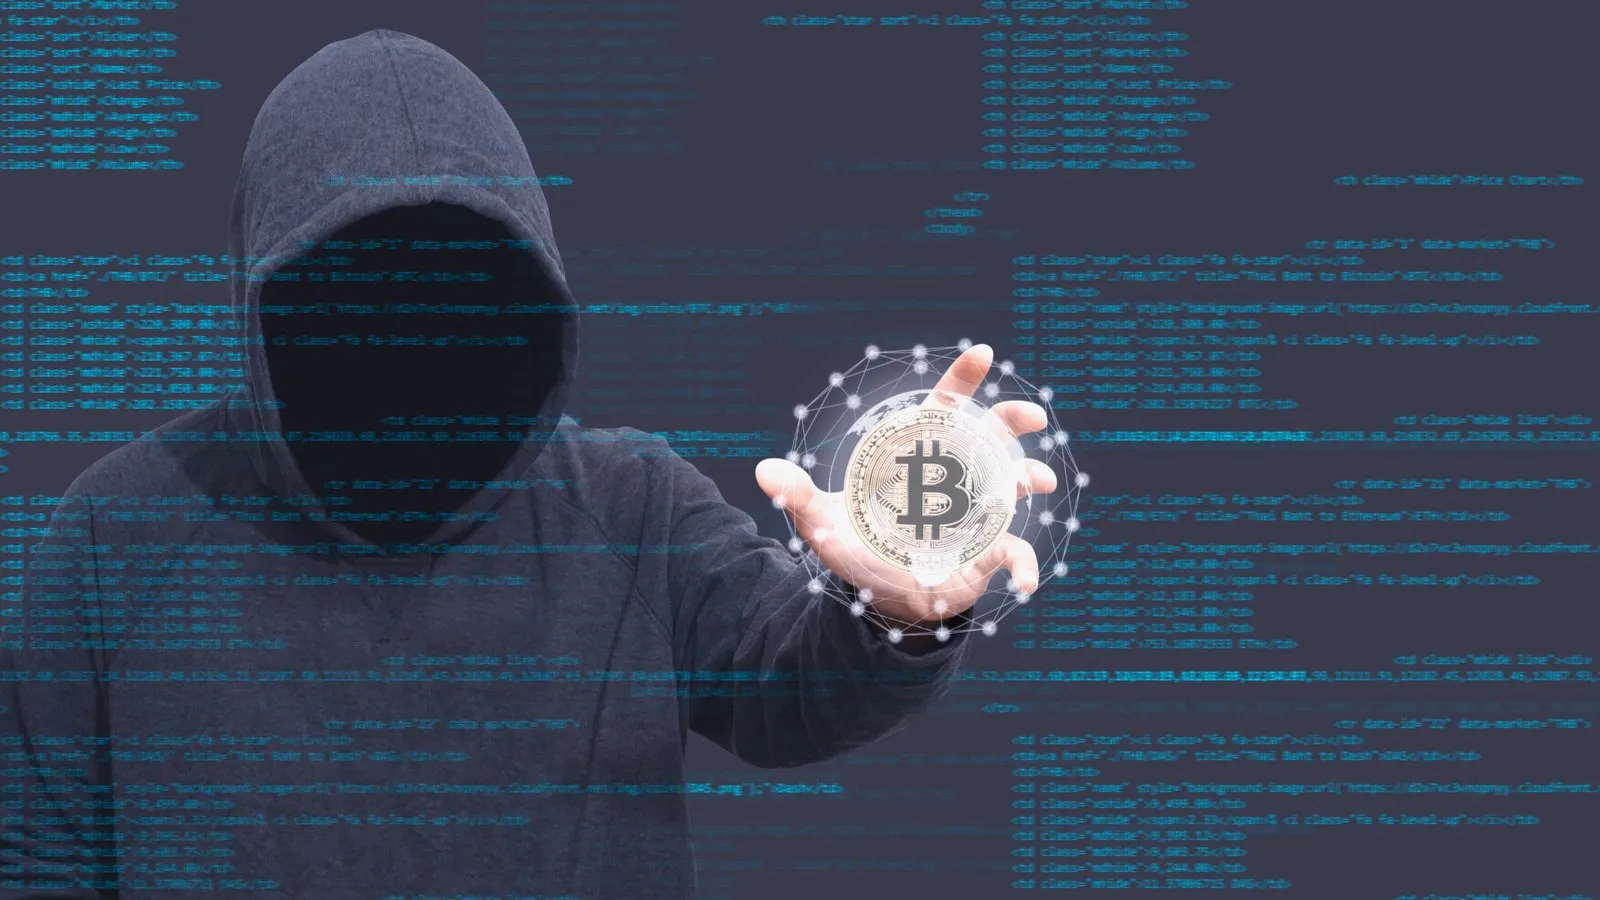 Bitcoin and hackers. Image: Shutterstock